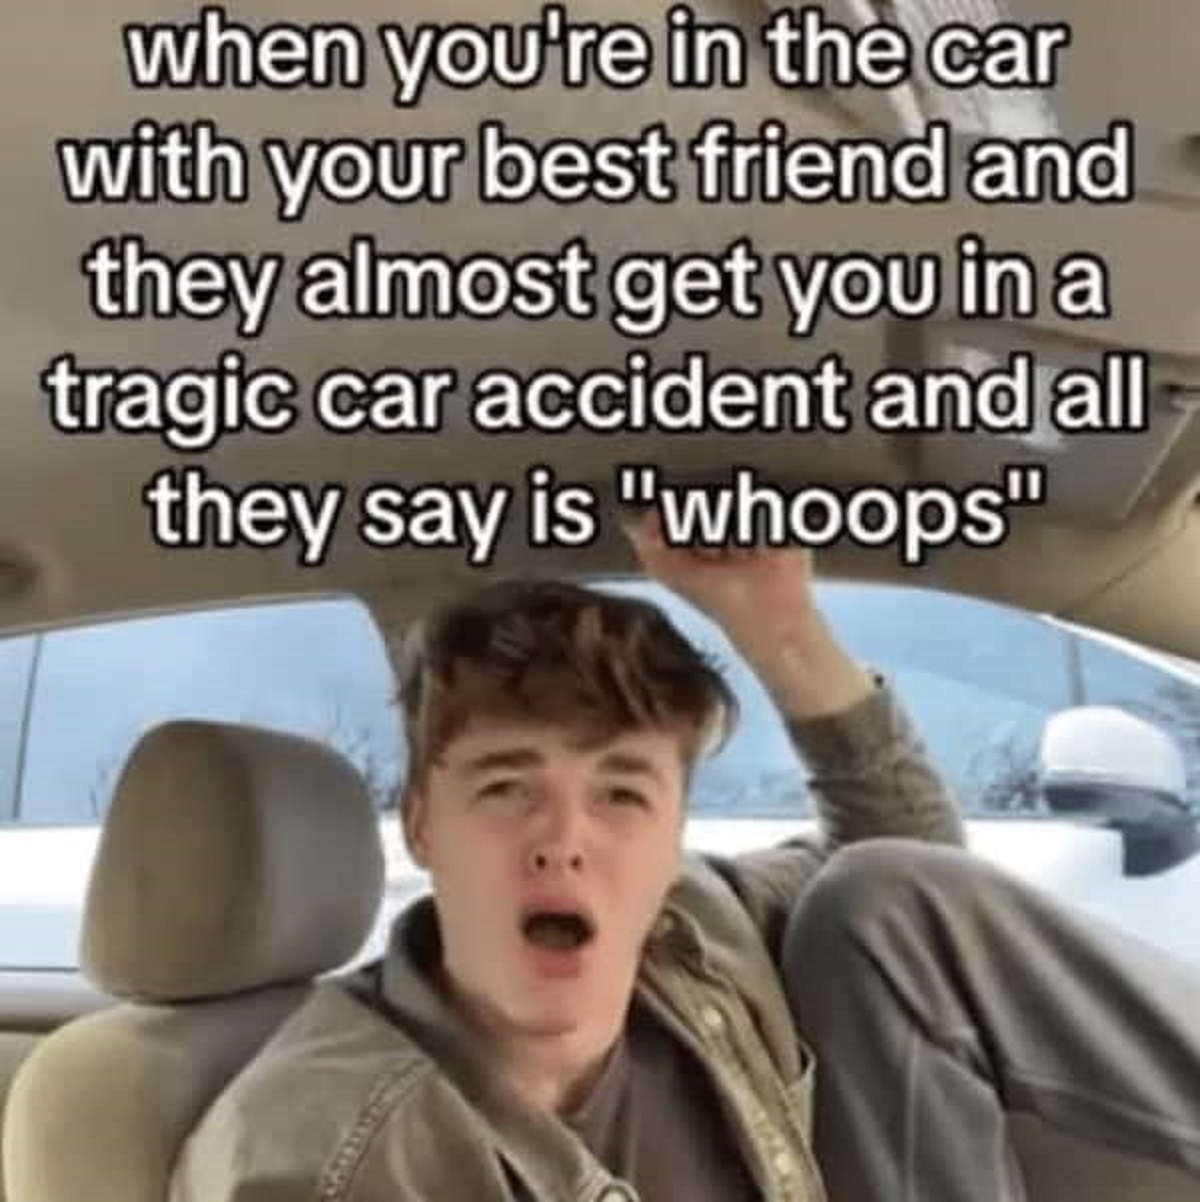 photo caption - when you're in the car with your best friend and they almost get you in a tragic car accident and all they say is "whoops"